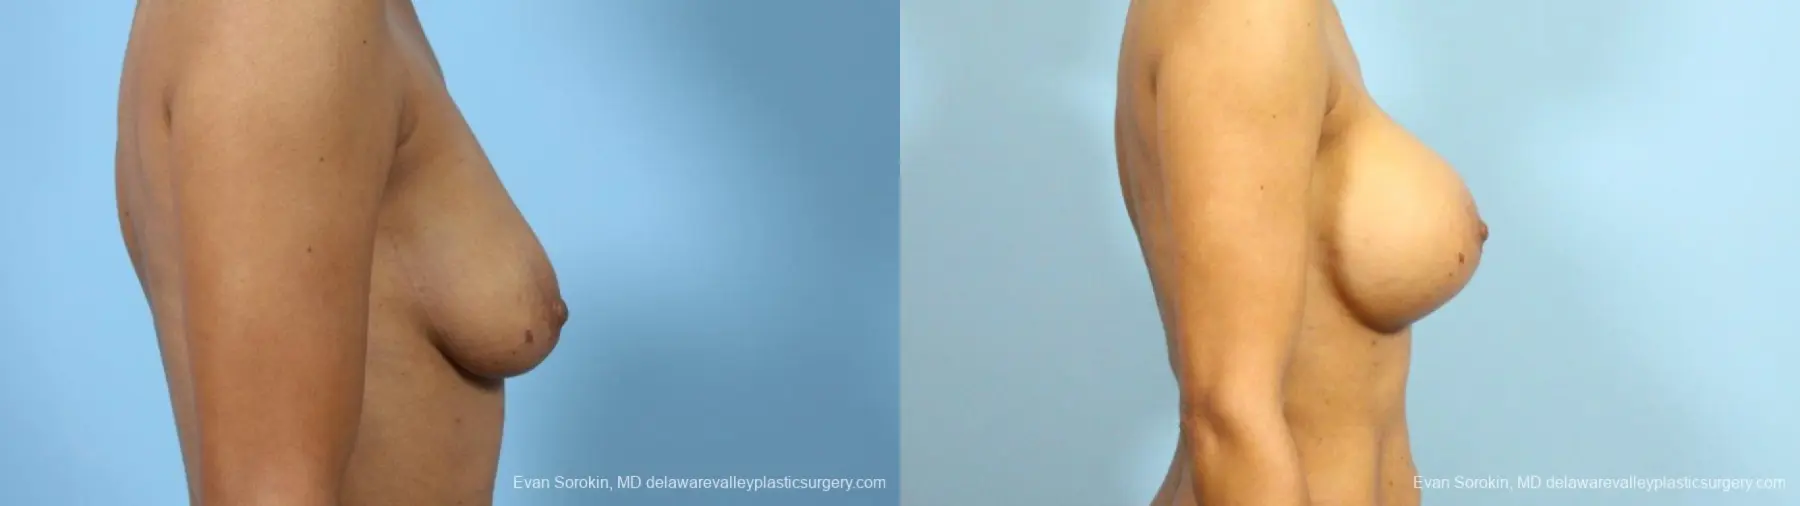 Philadelphia Breast Augmentation 9288 - Before and After 3